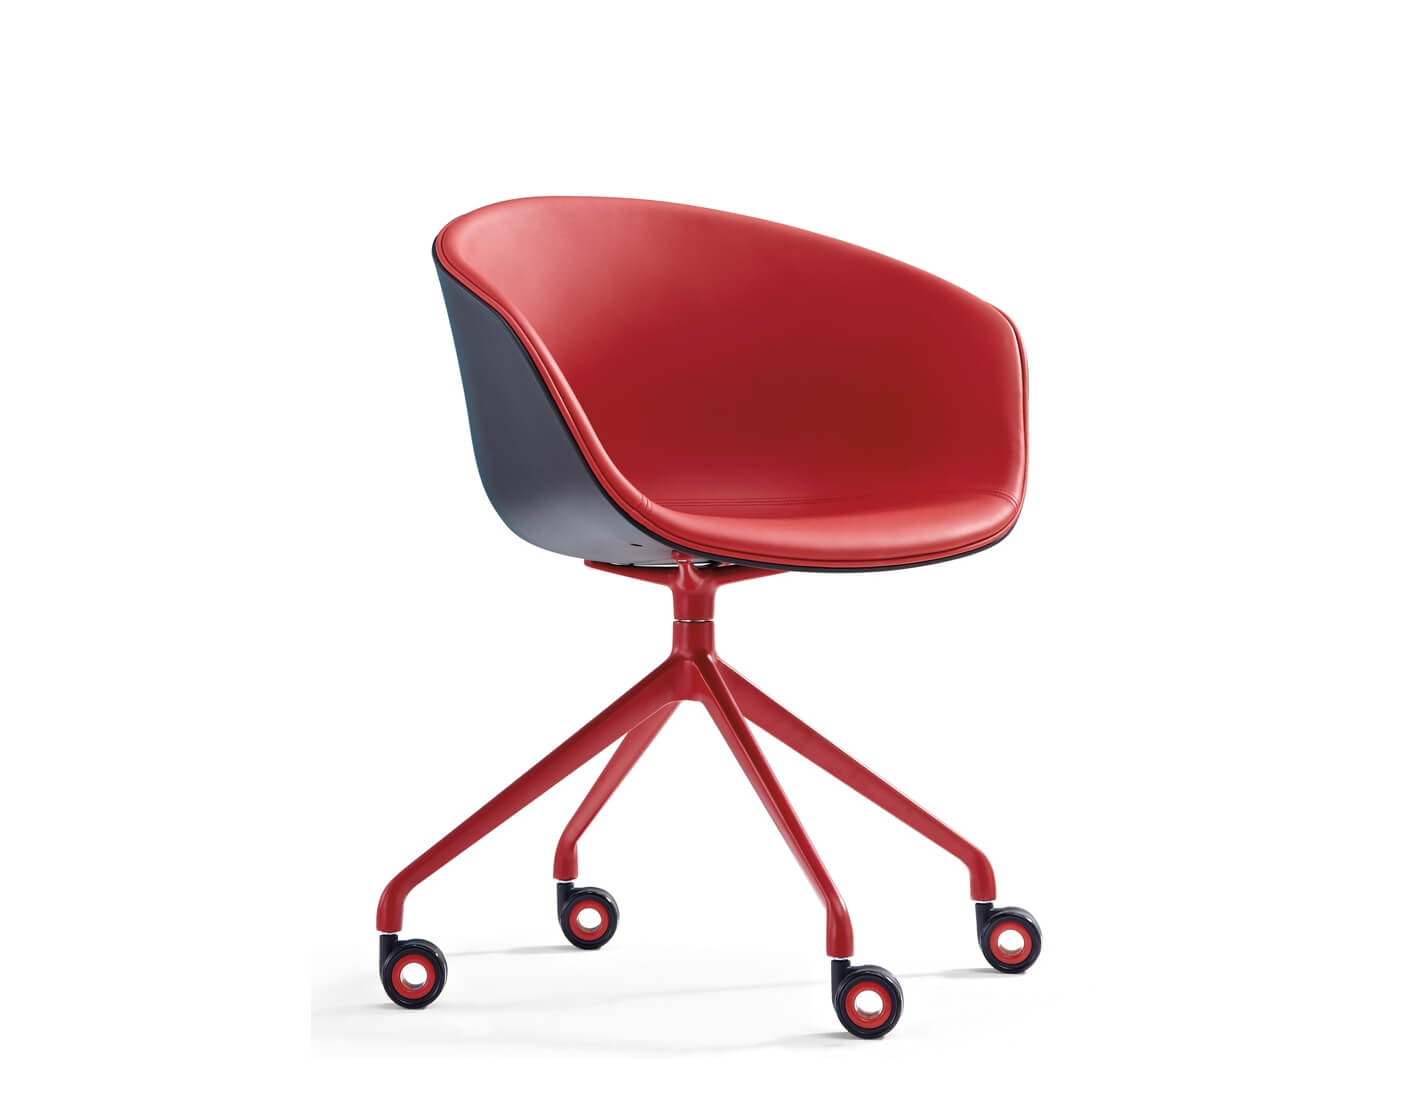 Frey Red Contemporary Designer Chair, Modern Red Leather Chair